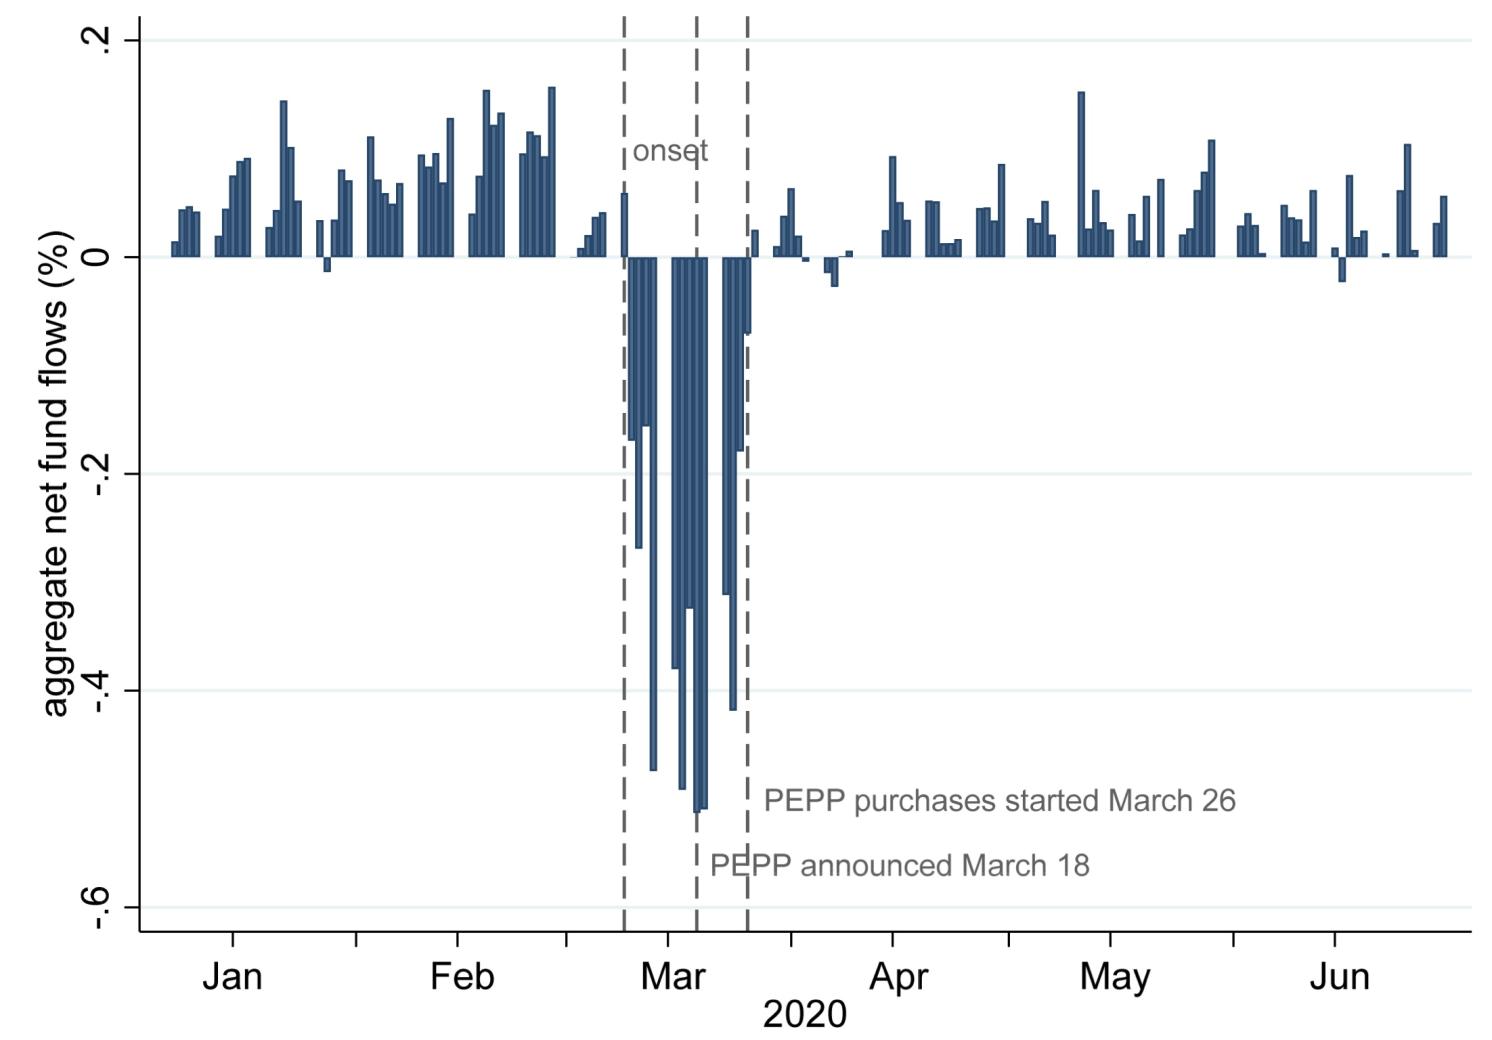 Figure 1 Mutual fund net flows and key events